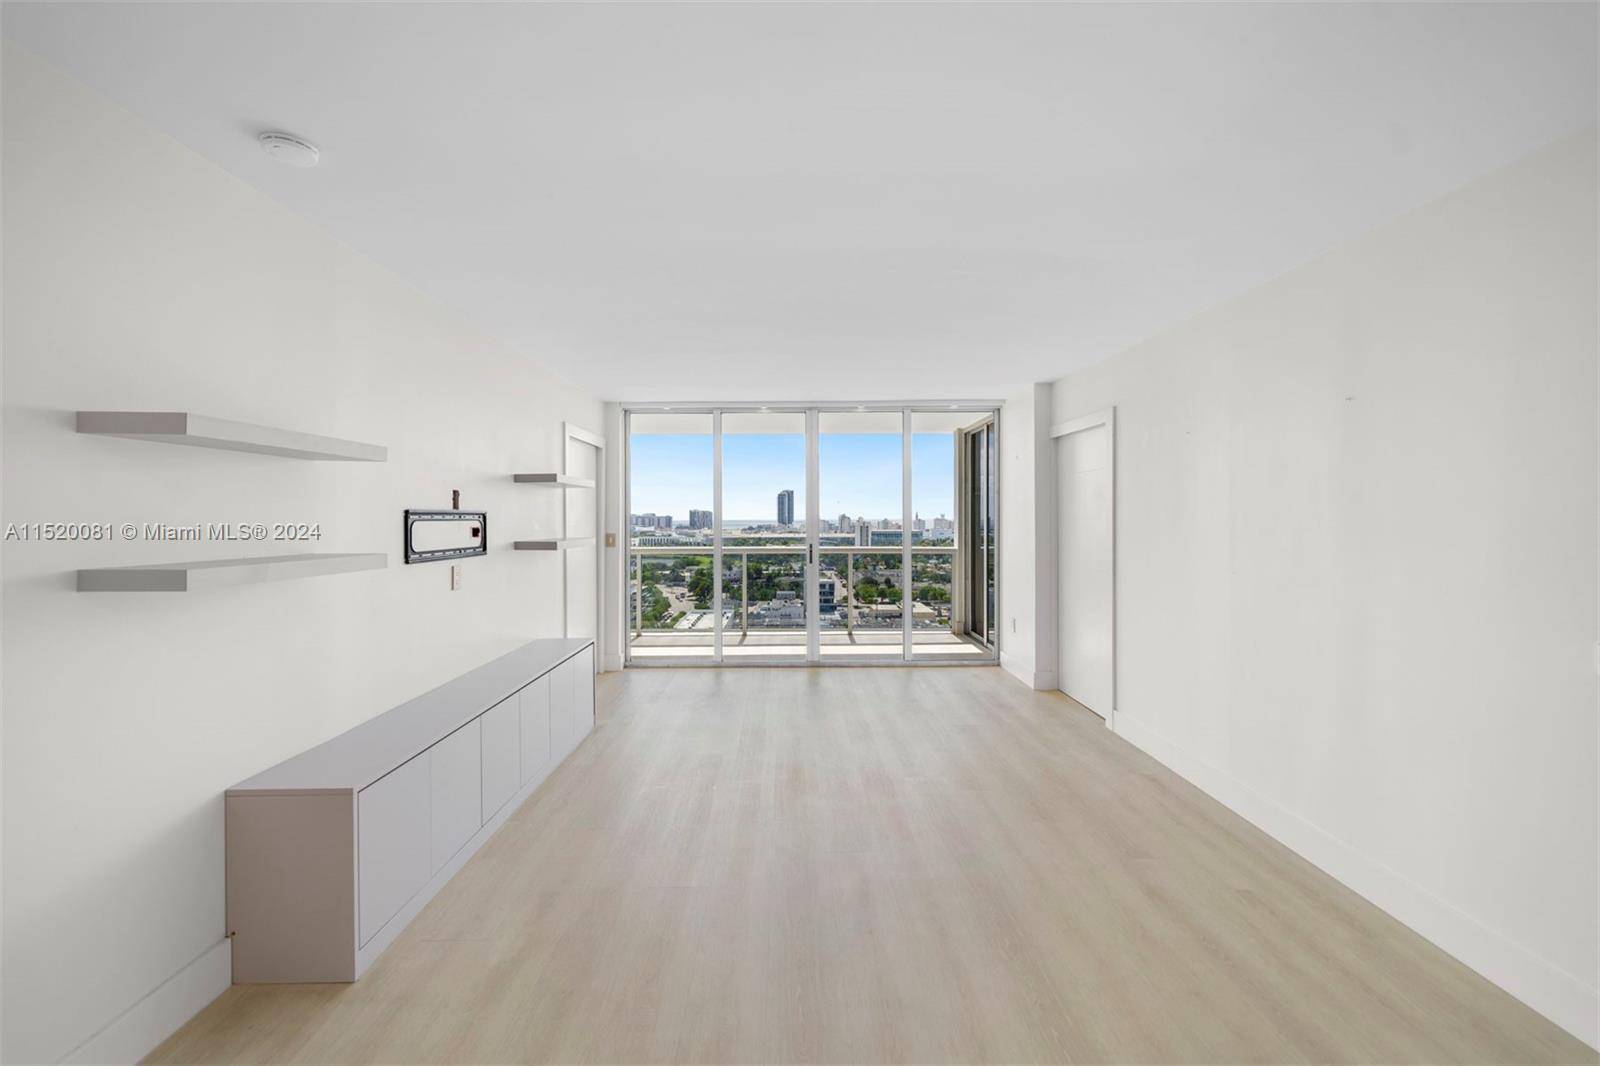 Soaring ceilings and beautiful floors are highlighted by tons of natural light spilling in through an abundance of windows, fully remodeled two bedrooms and two bathrooms, the best layout in ...